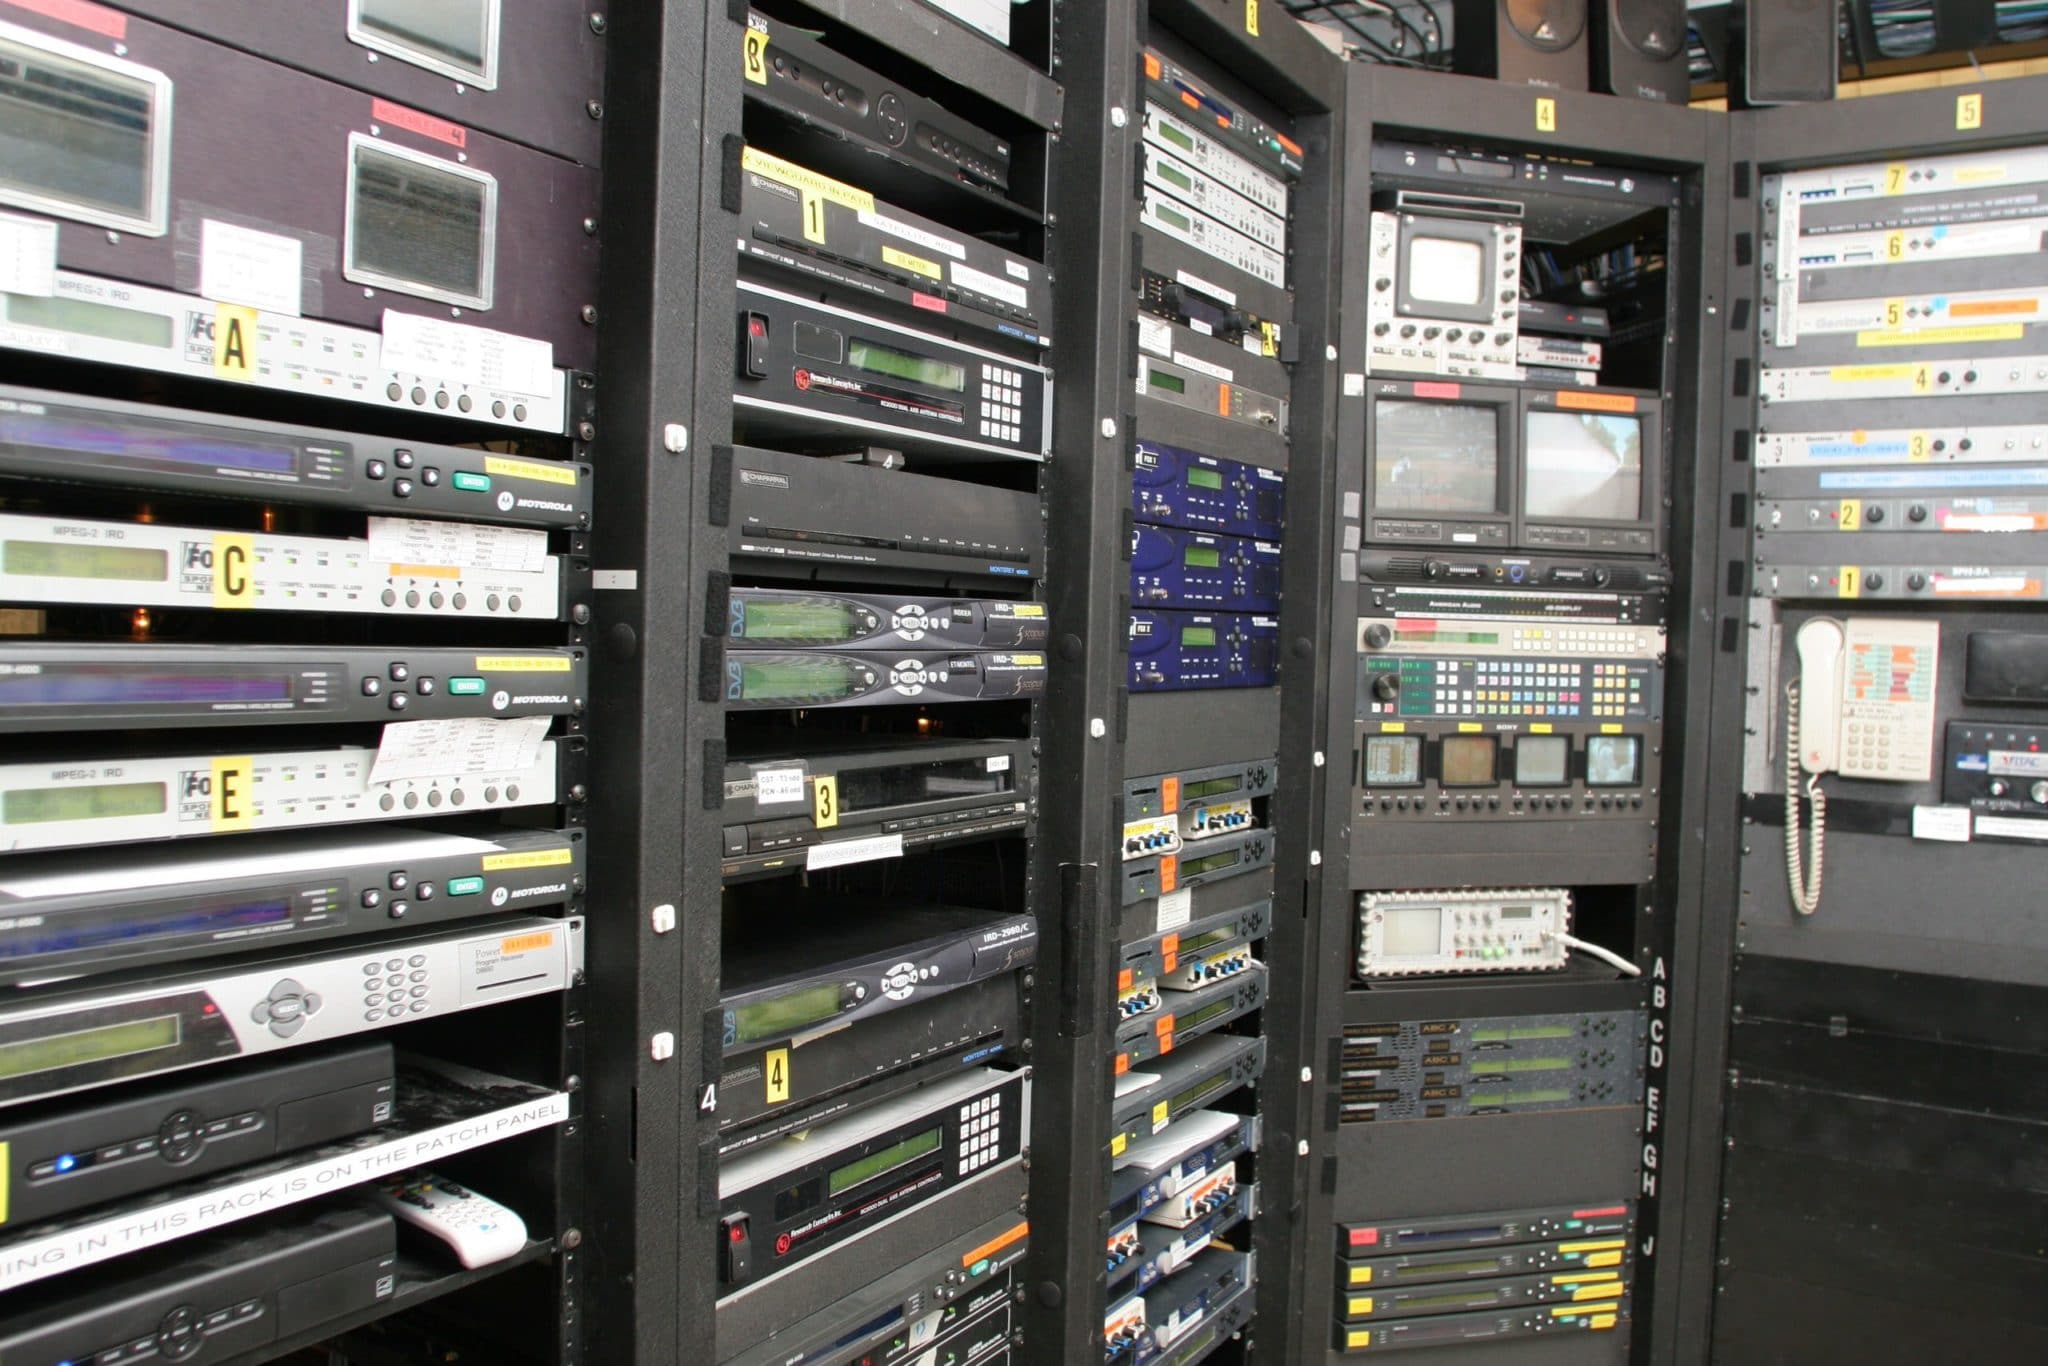 Control room monitors for captioning award shows